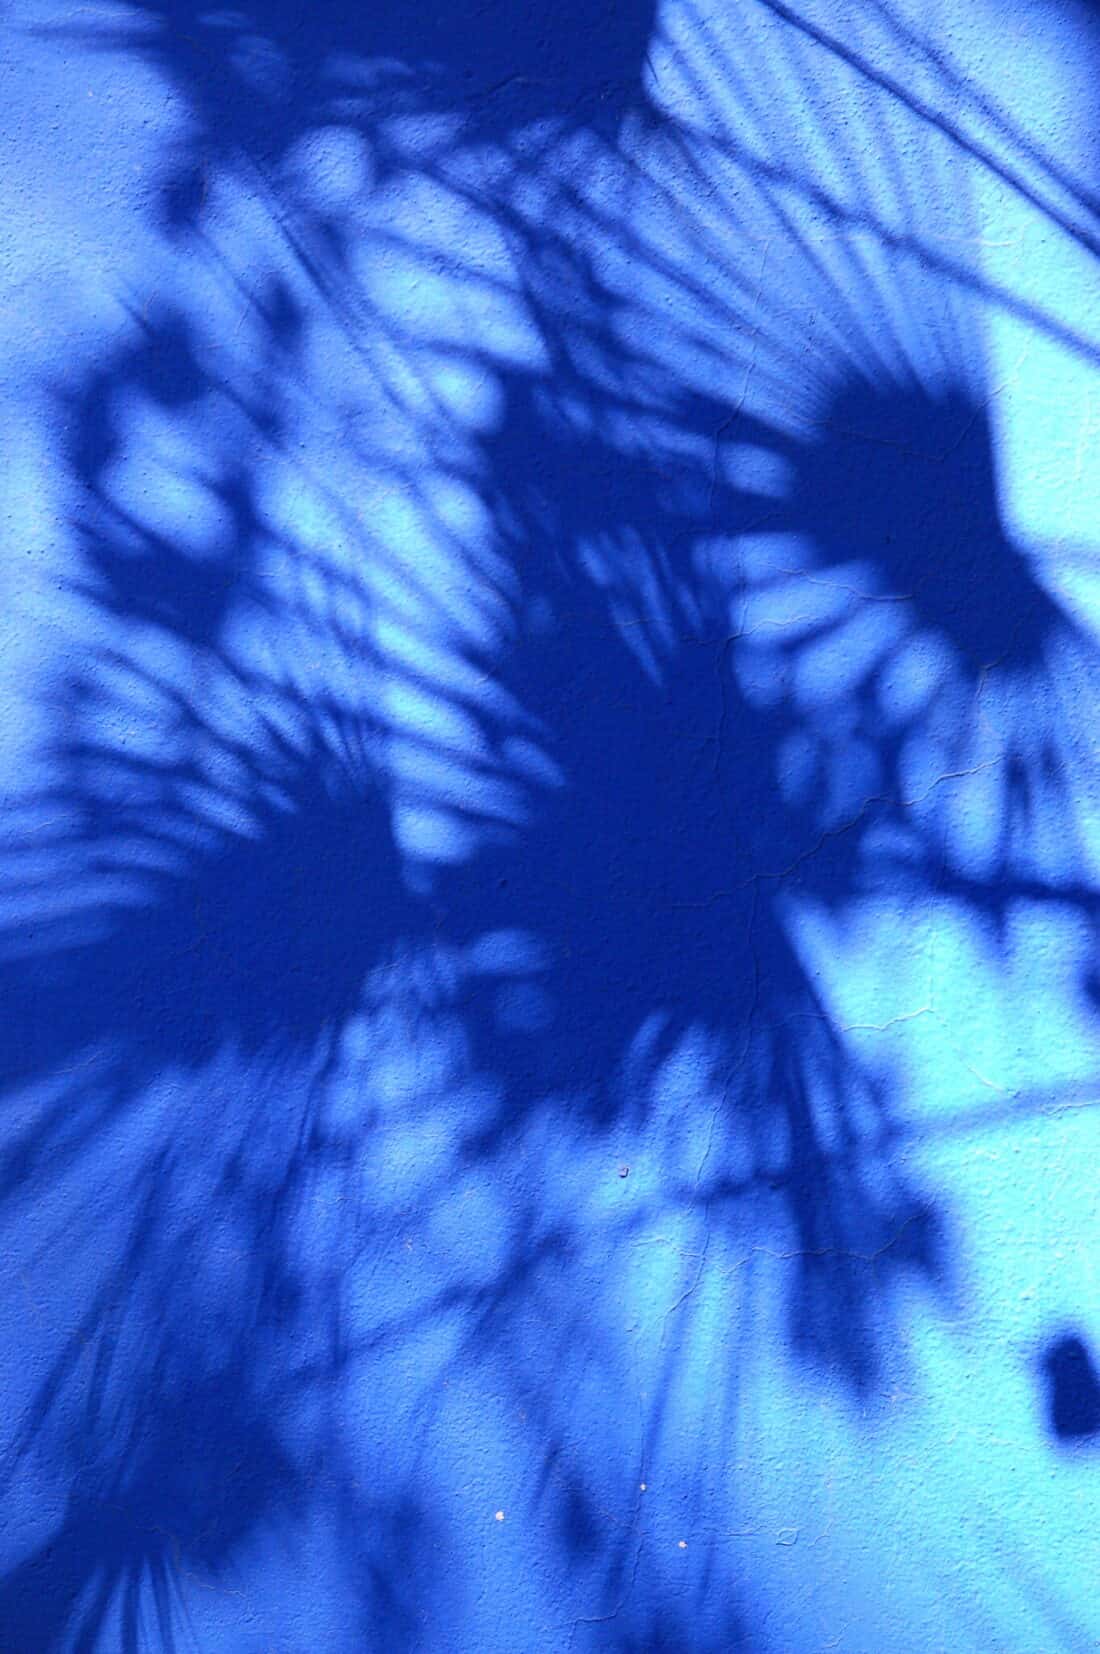 Palm tree shadows cast on the blue textured surface of Majorelle Garden.